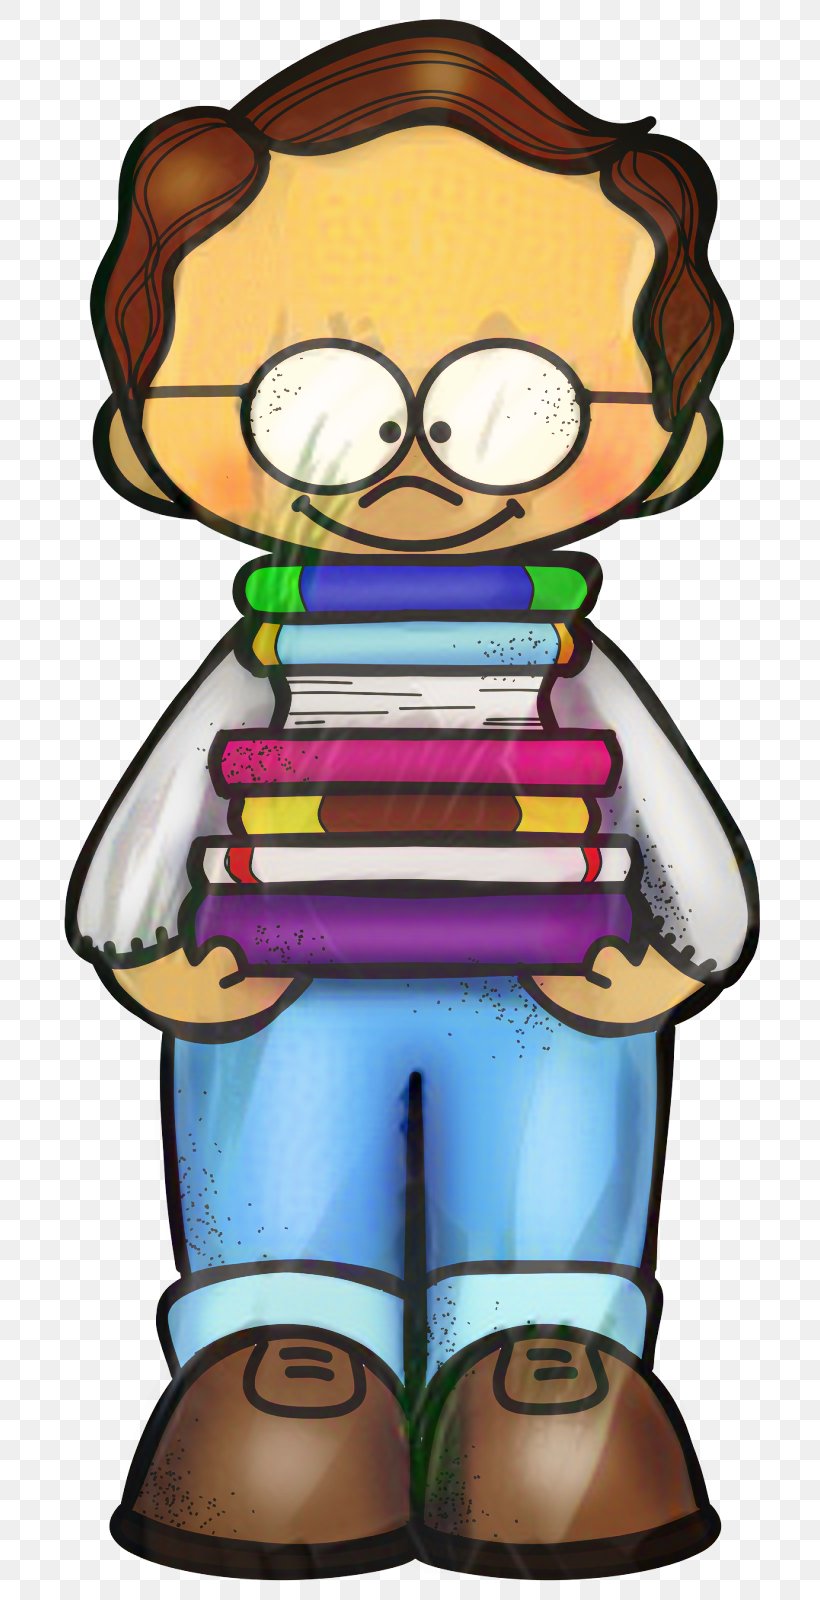 Library Clip Art Teacher Librarian Book, PNG, 732x1600px, Library, Book, Bookmobile, Cartoon, Education Download Free